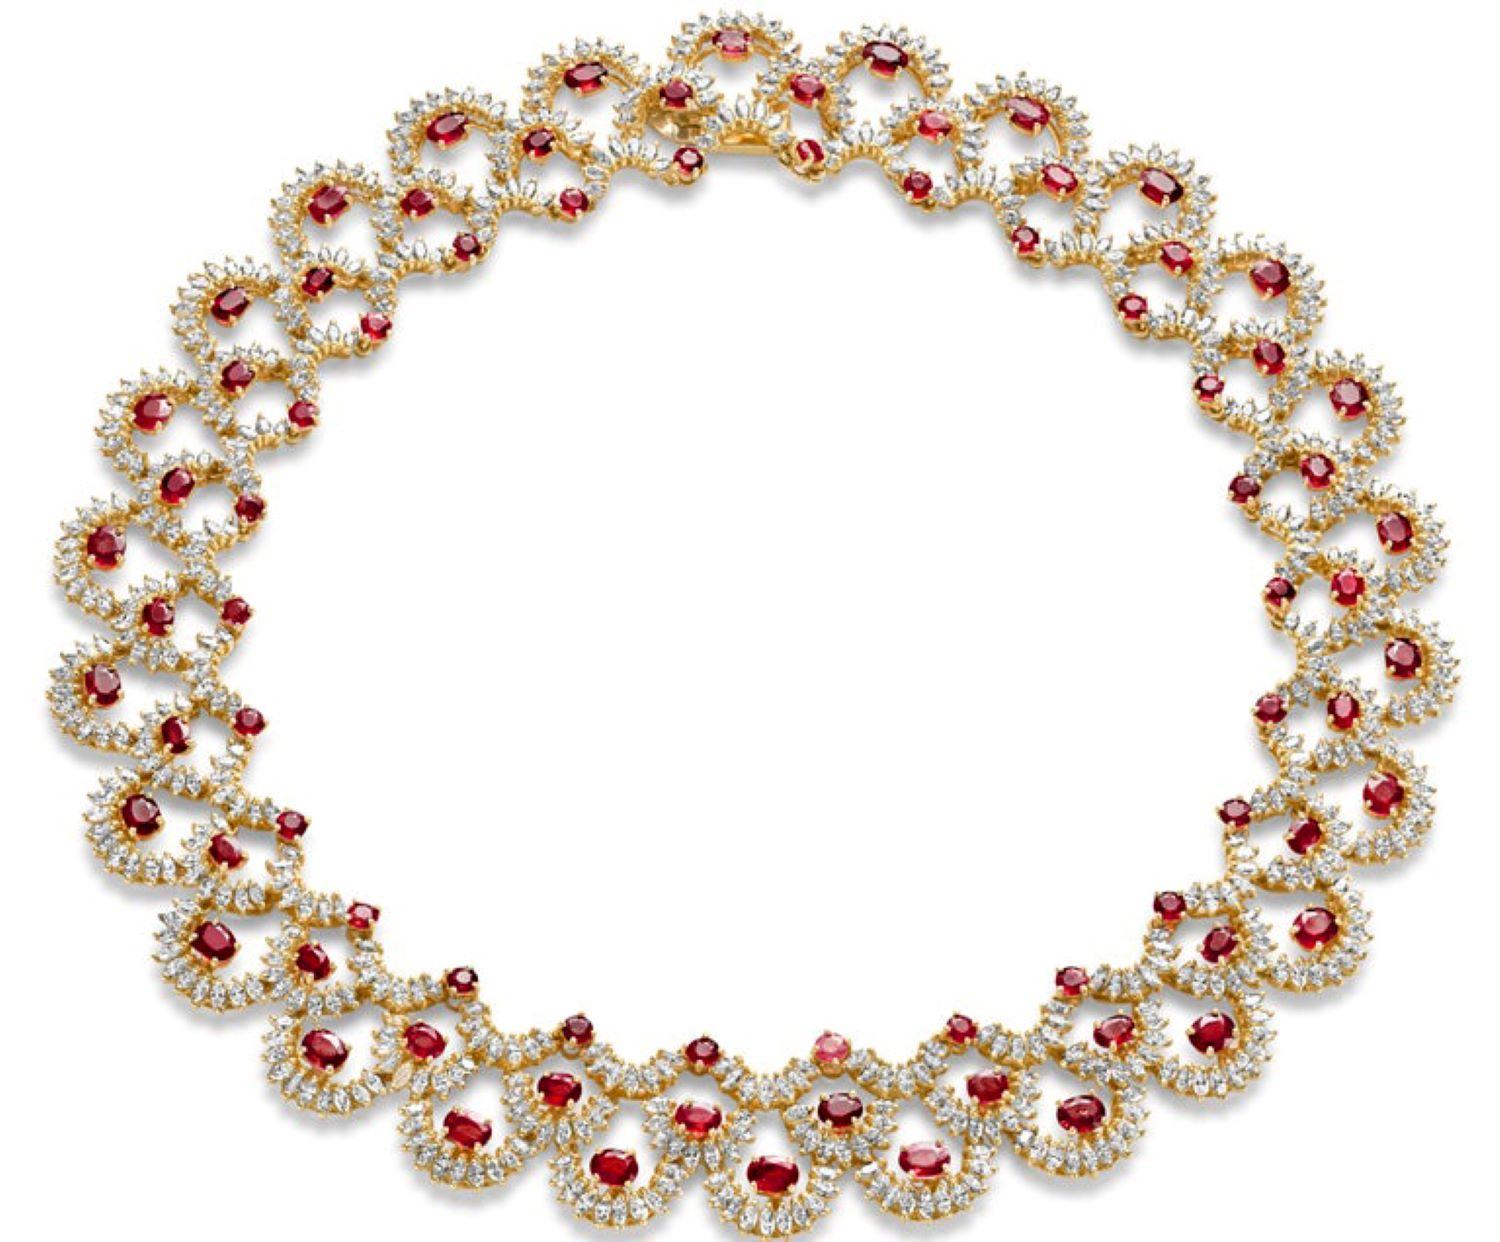 Stunning 18 kt. Yellow Gold Choker necklace With 27 ct. Rubies and 36 ct. Marquise Cut Diamonds, Estate Sultan of Oman Qaboos Bin Said

Ruby: 26 oval cut rubies 5.7 mm x 4.2 mm together 13 ct. 
26 oval cut rubies 4.6 mm x 3.5 mm together 9.1 ct.
26